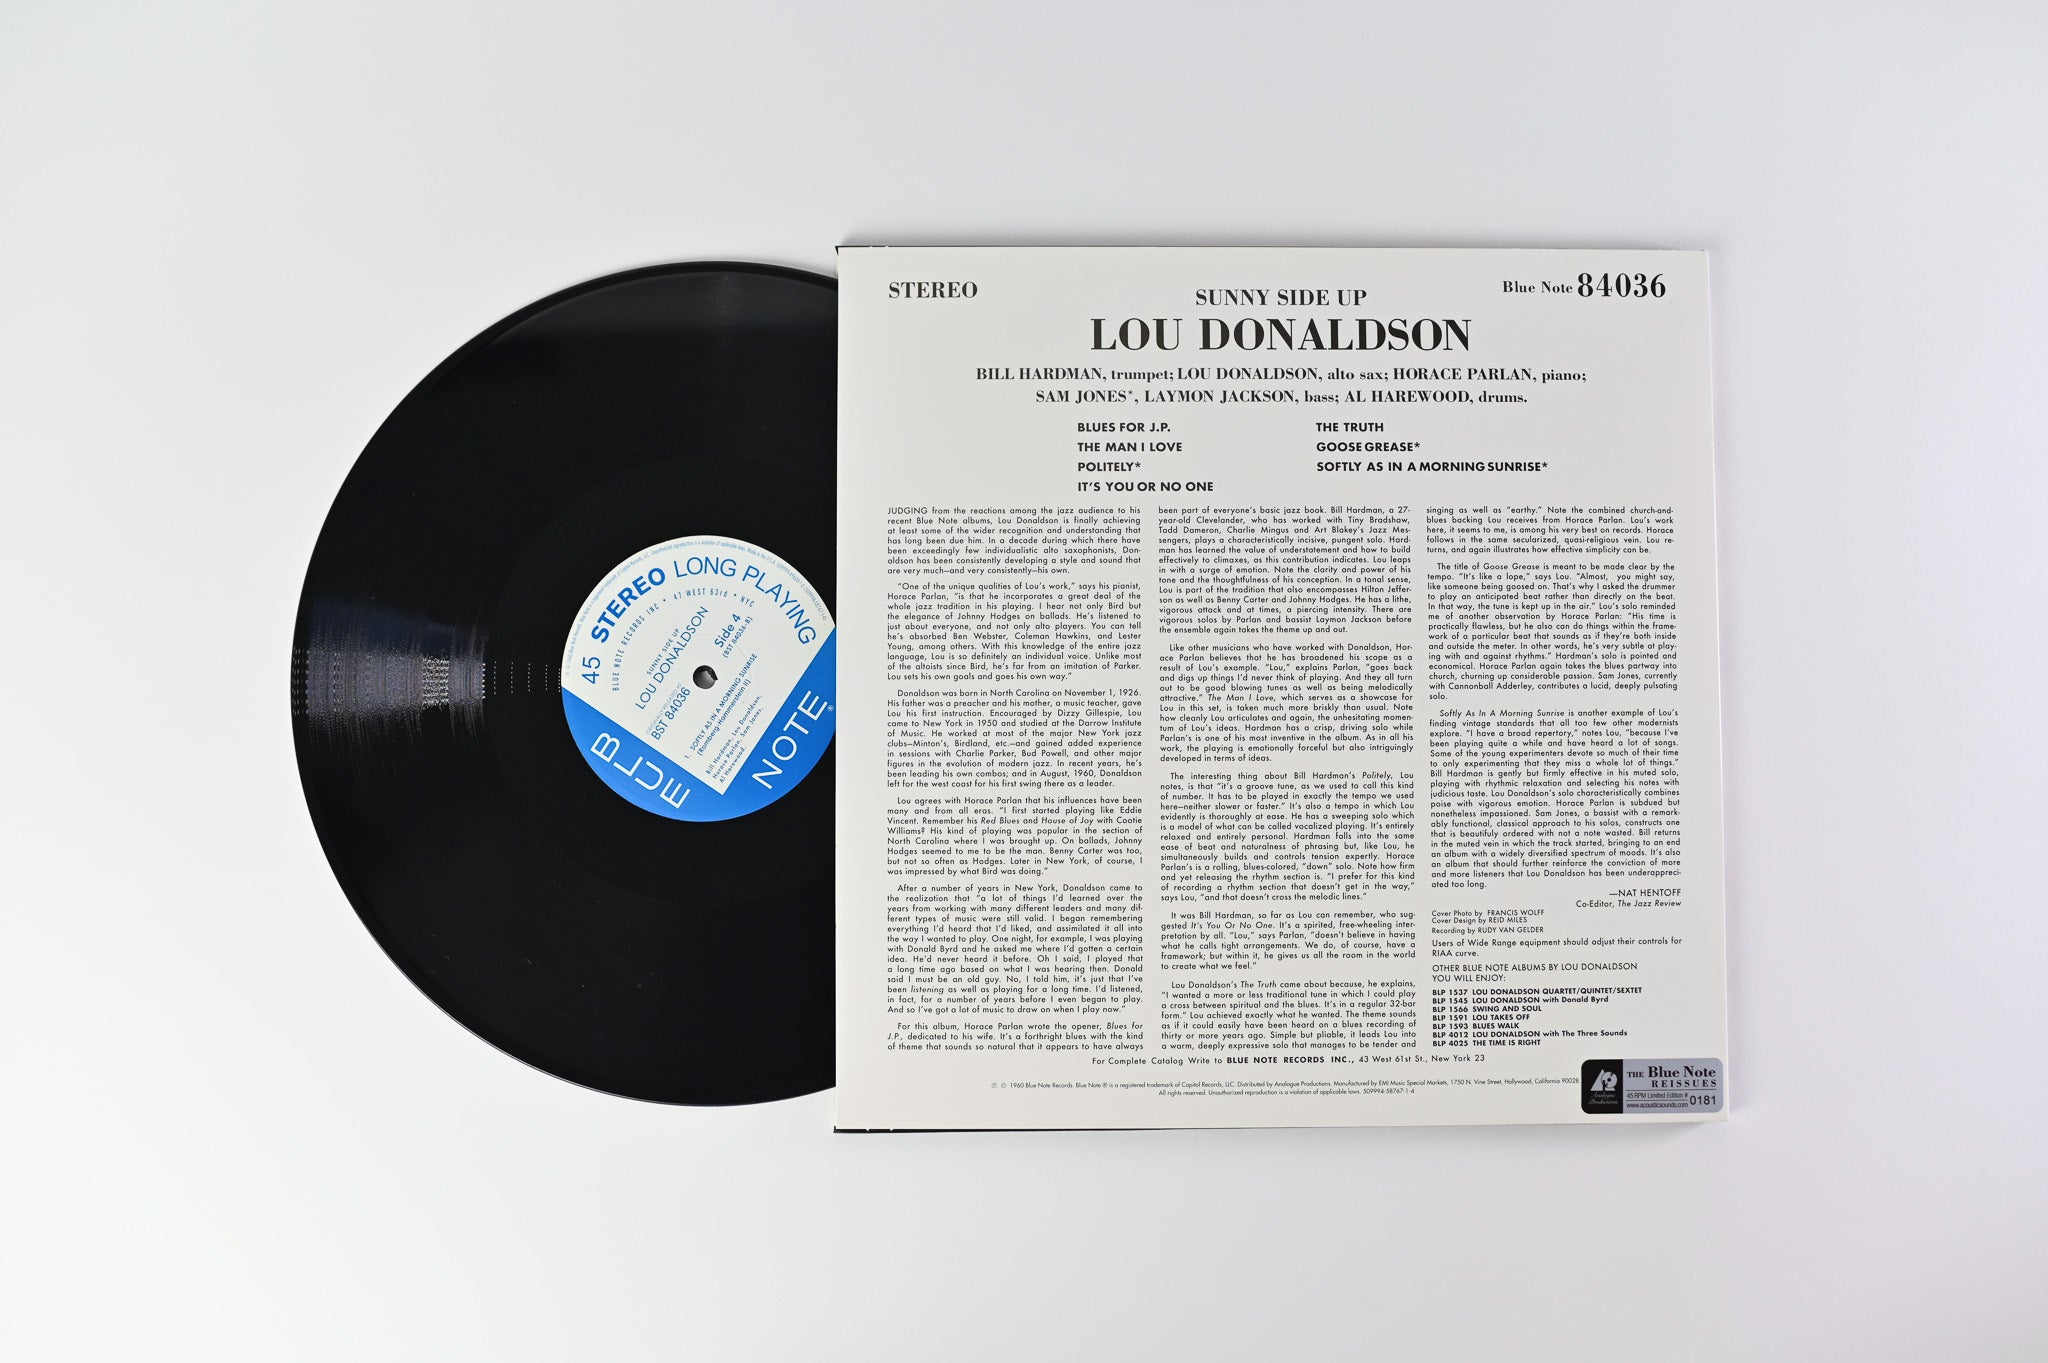 Lou Donaldson - Sunny Side Up on Blue Note Analogue Productions Reissue Numbered 45 RPM